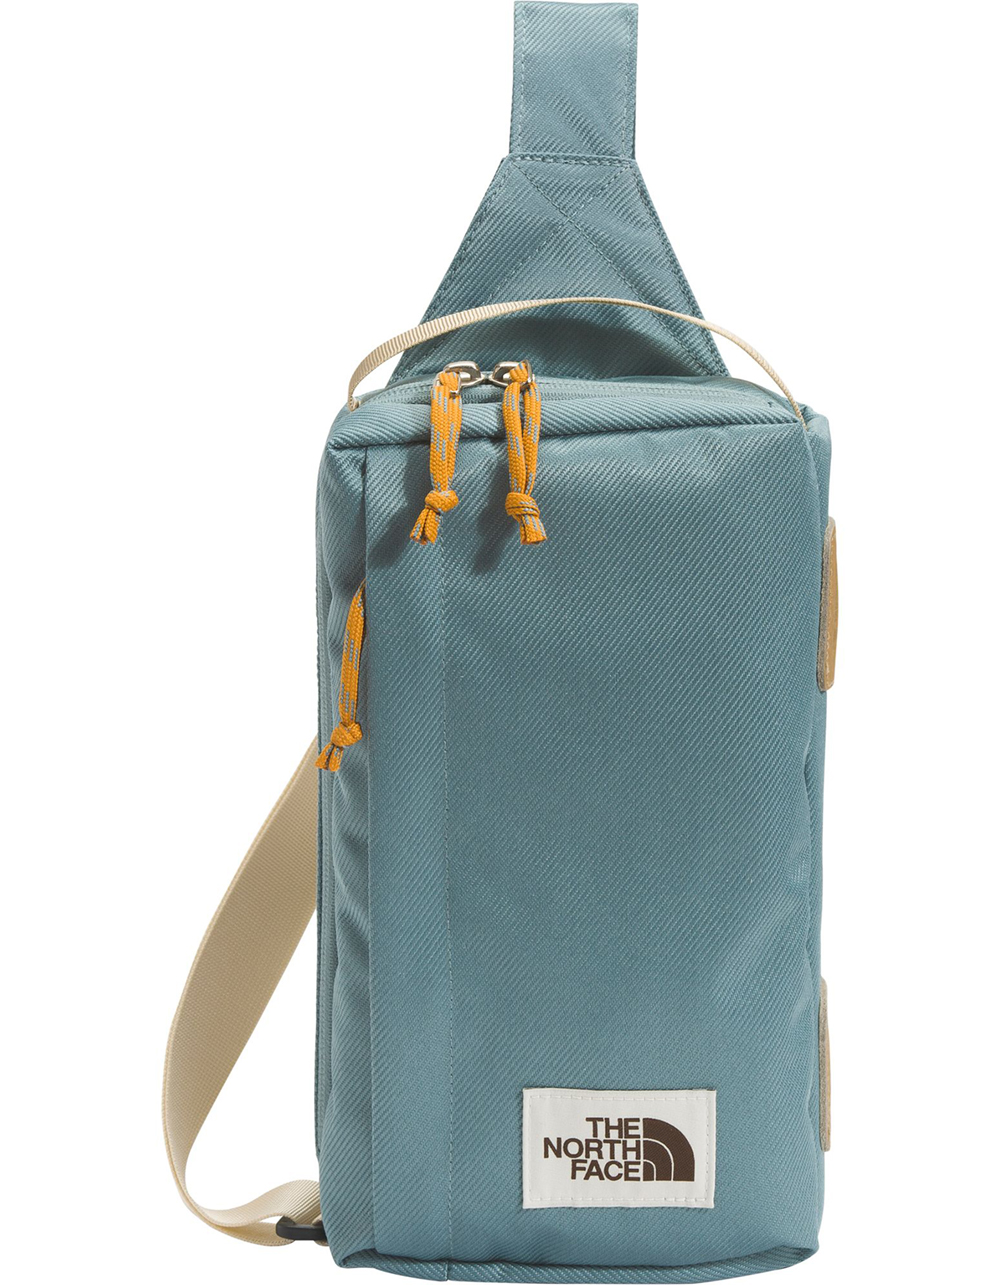 THE NORTH FACE Field Bag - BLUCO - NF0A3KZS-4F5